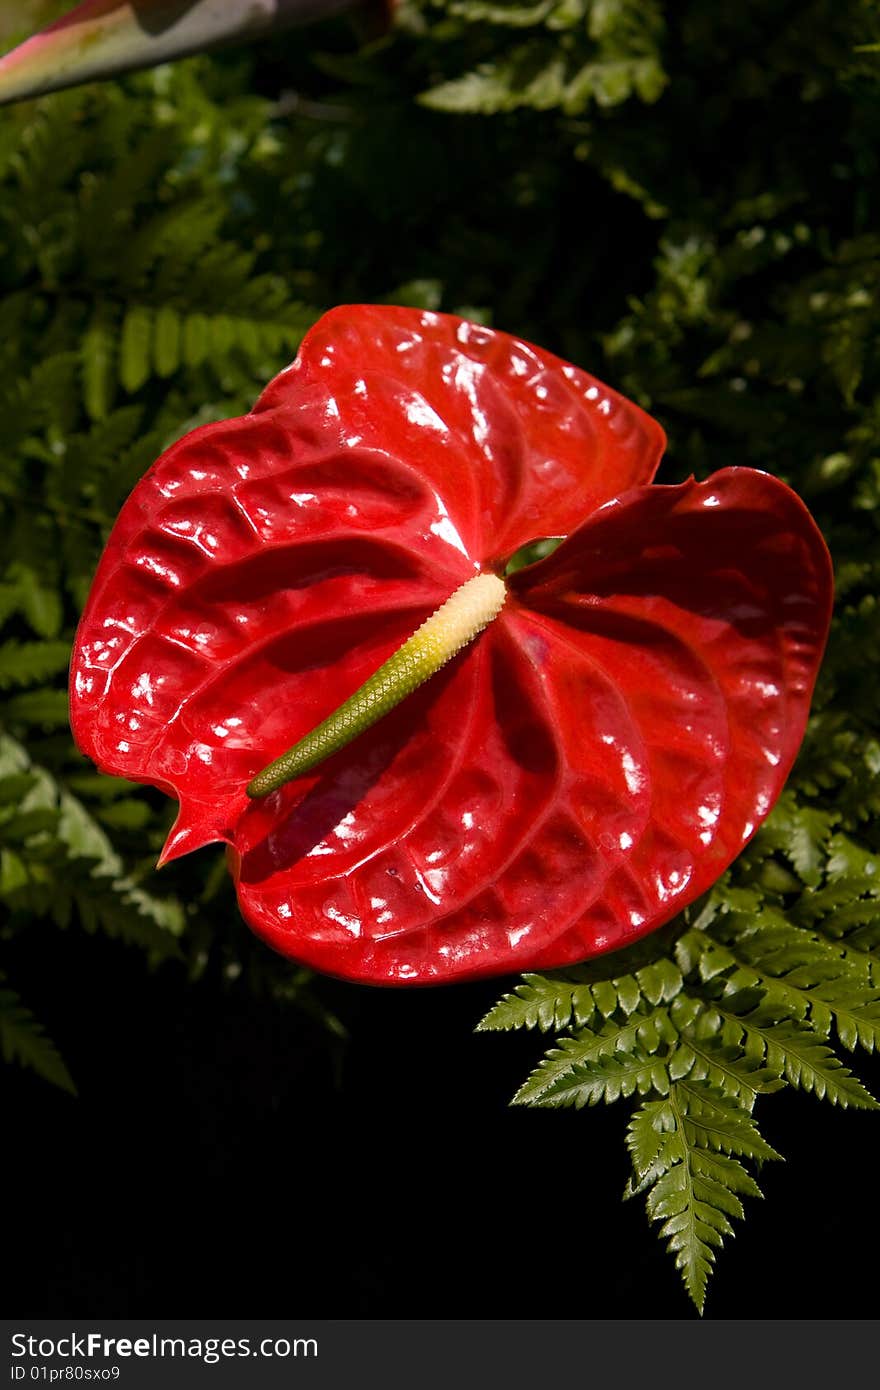 A red flamingo flower from Madeira Portugal. A red flamingo flower from Madeira Portugal